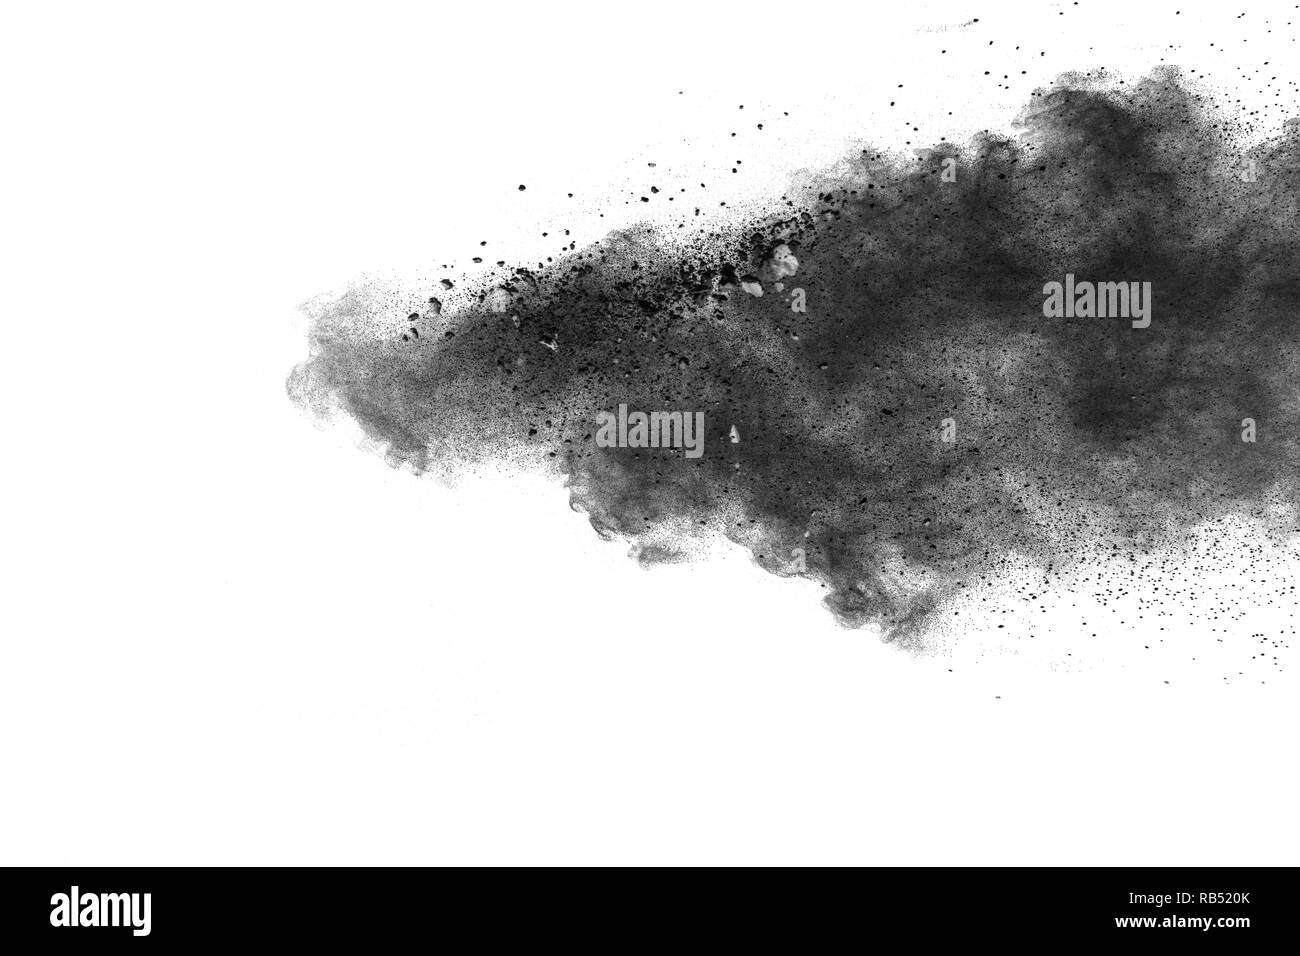 Black powder explosion against white background. Charcoal dust particle exhaie in the air. Stock Photo